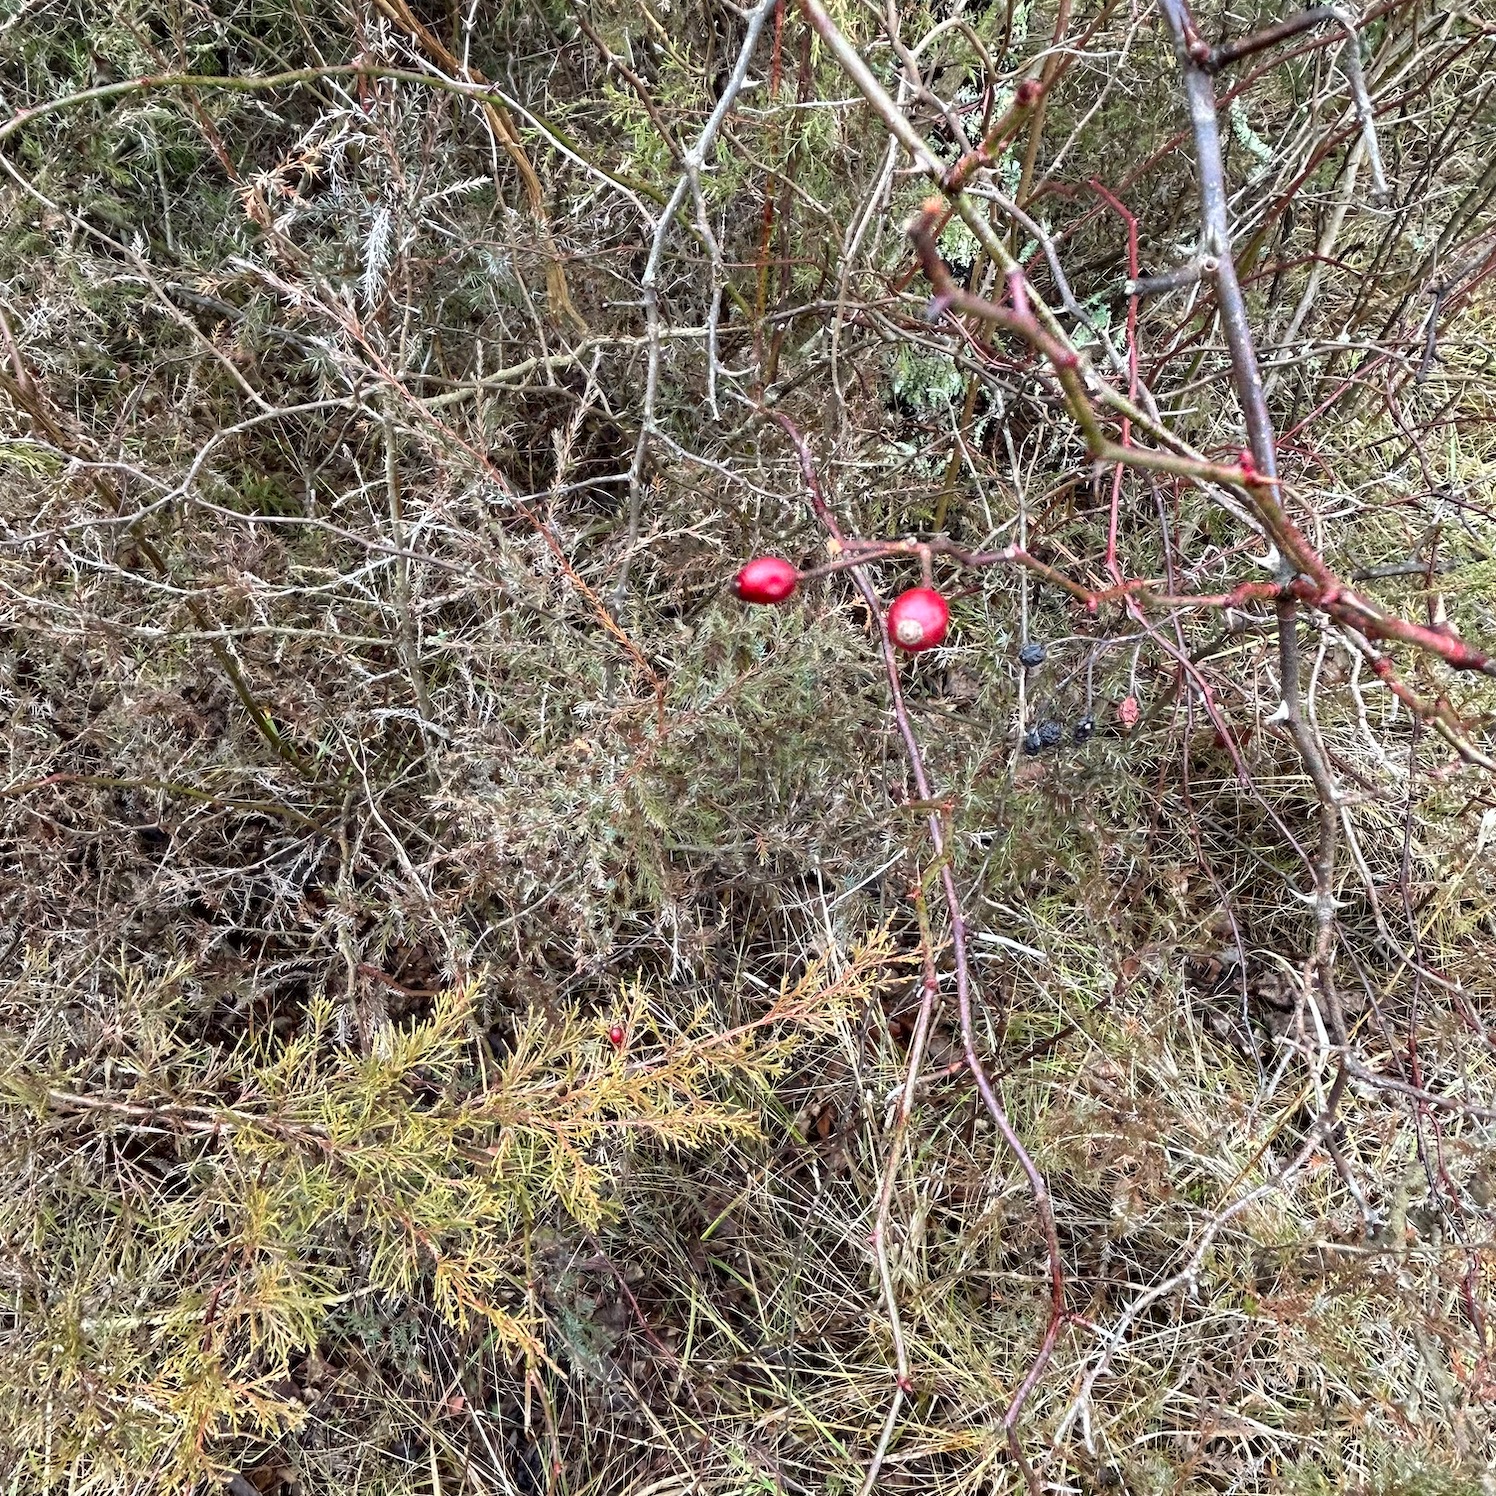 Two bright pink berries in a brown-green field